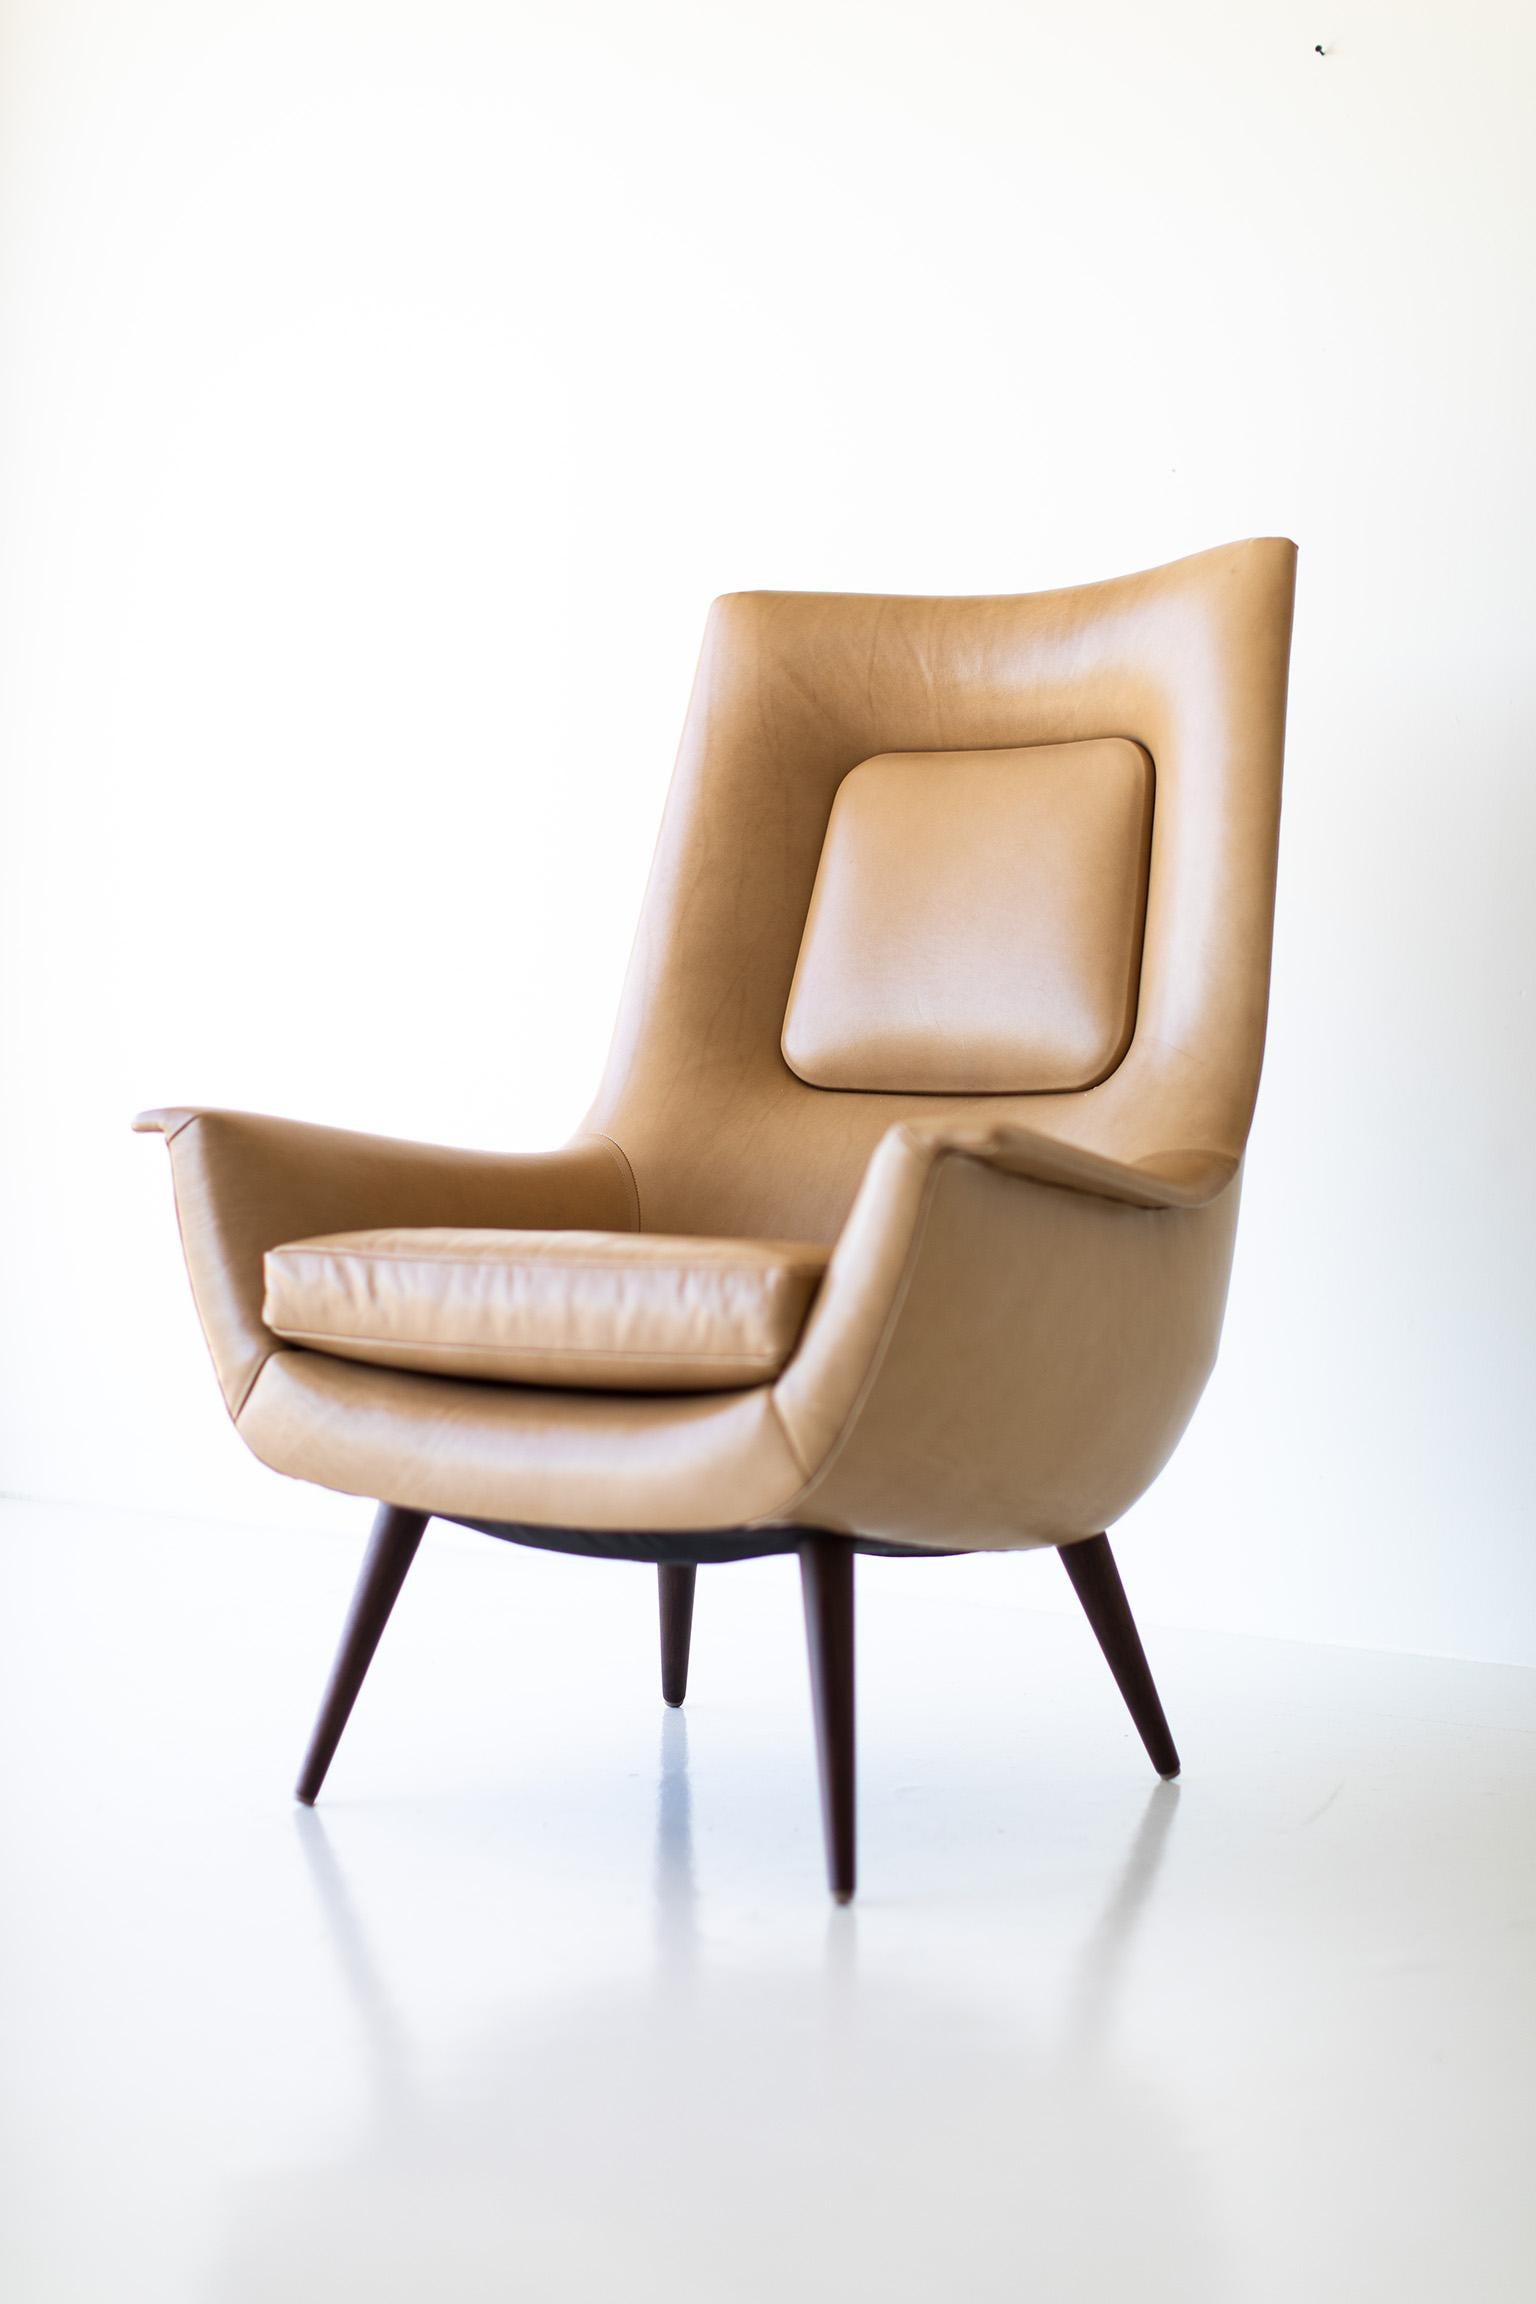 CraftAssociates lounge chair, Modern lounge chair, leather and walnut, peabody

This Lawrence Peabody high back chair P-1714 for craft Associates Furniture is expertly hand crafted and upholstered. These Peabody chairs are licensed reintroductions